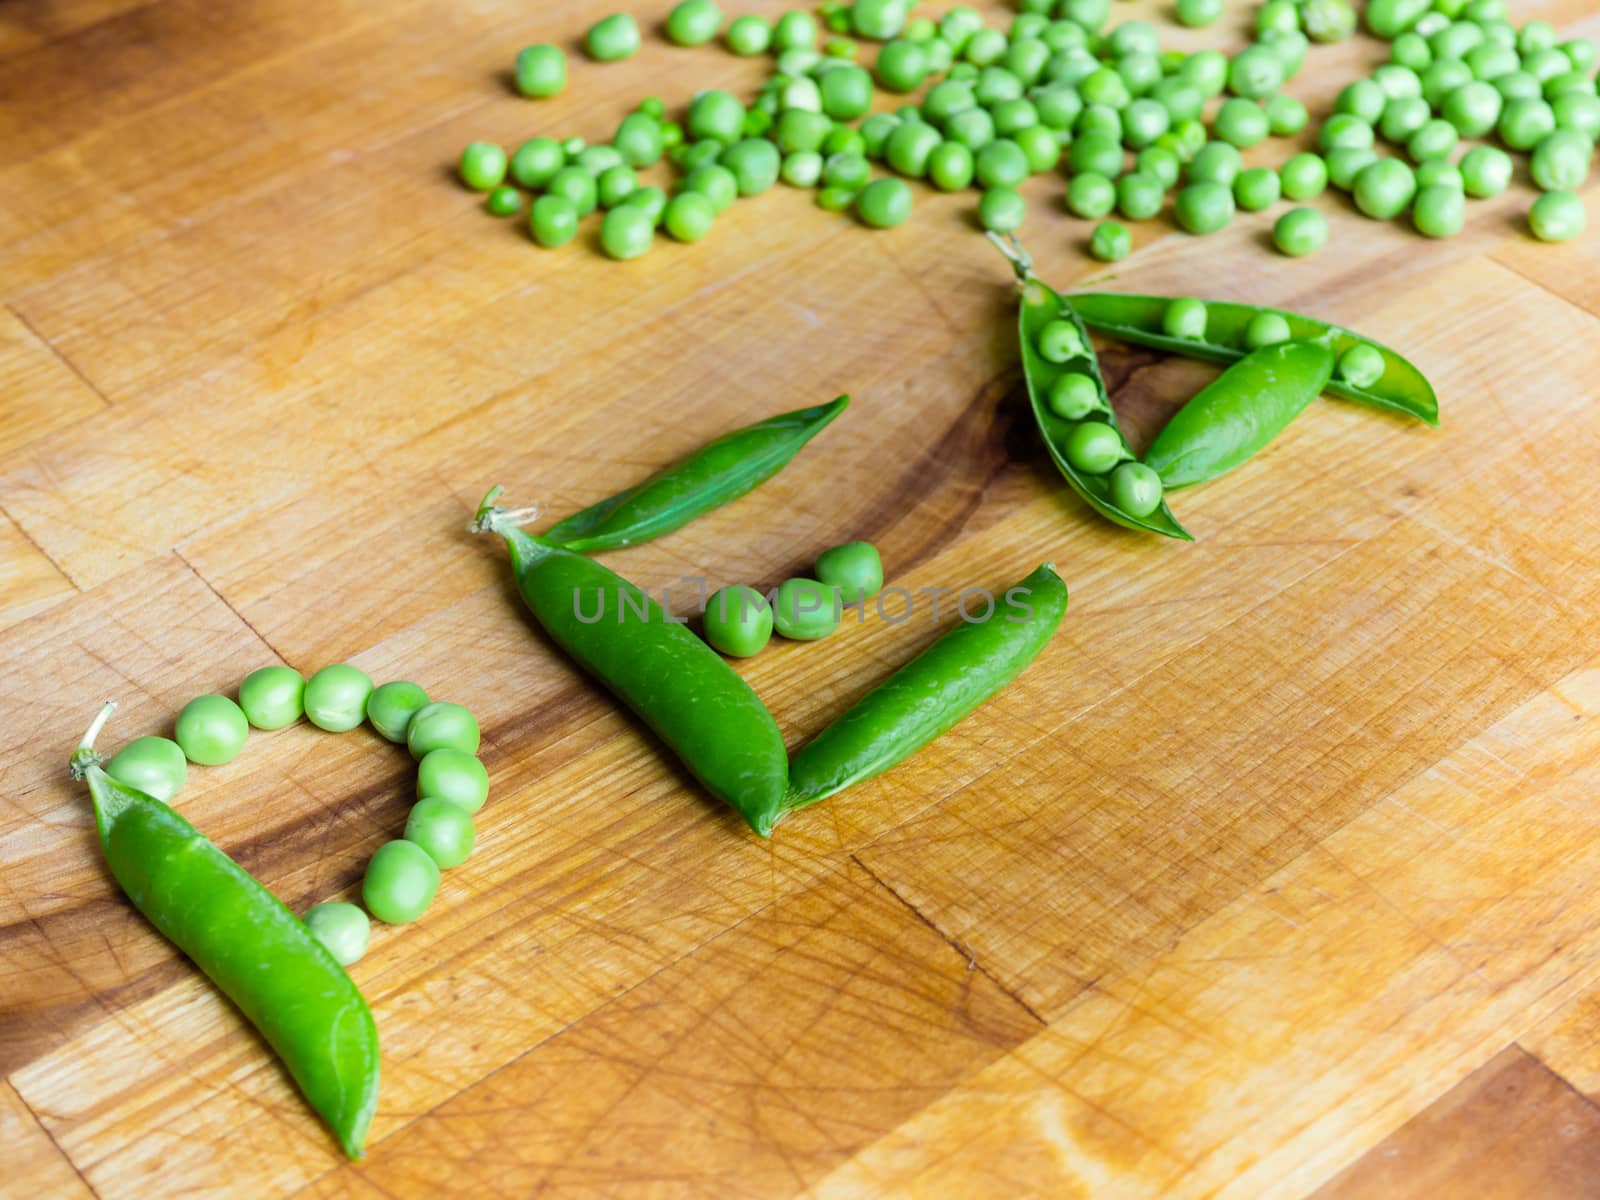 Word PEA created with peas on a wooden board with a podded peas in the background